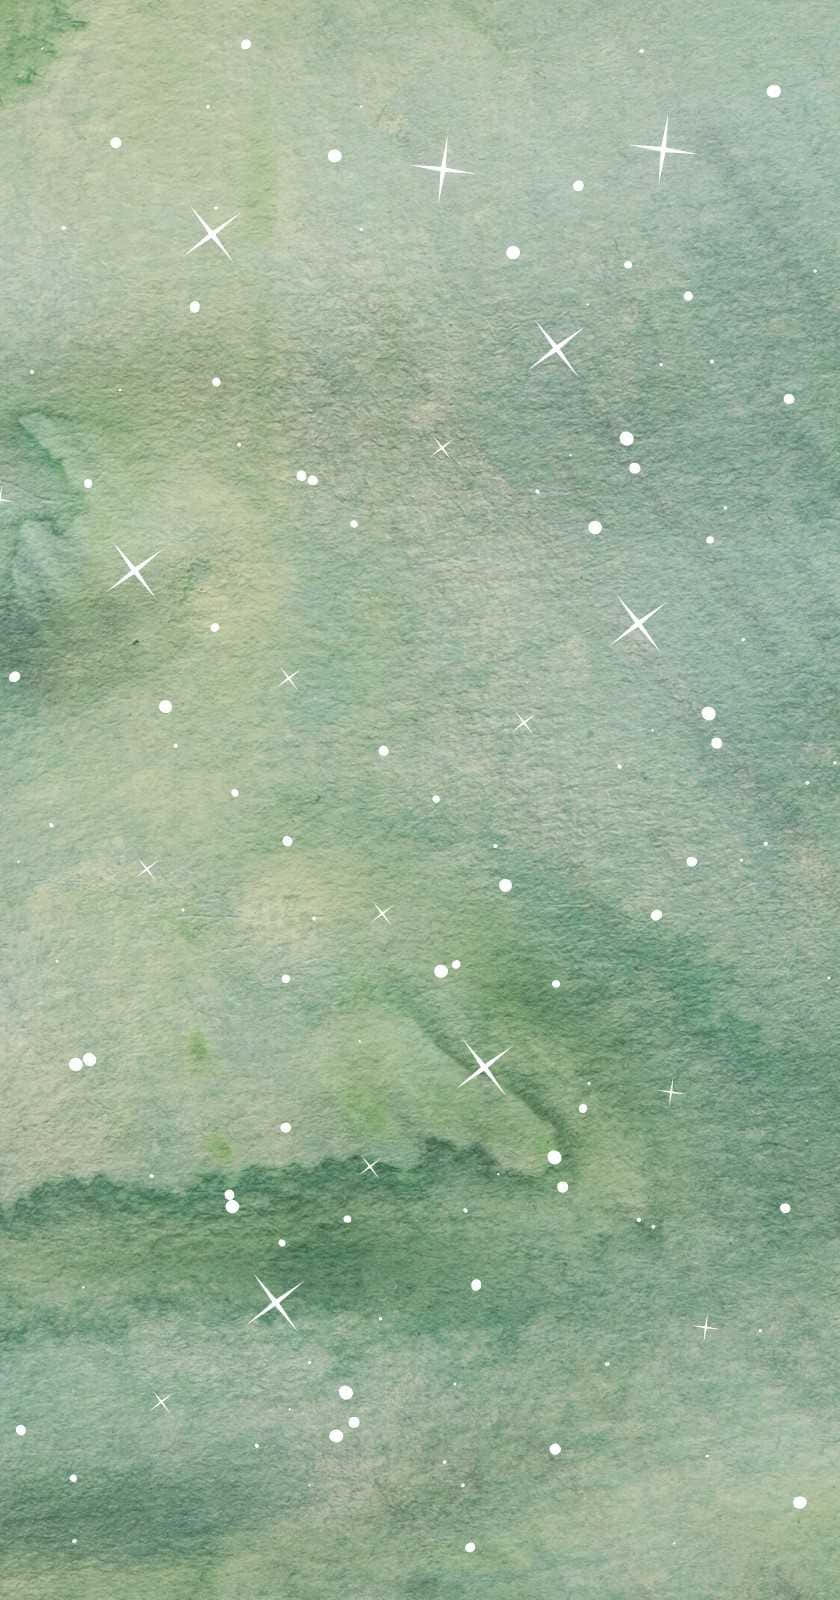 A Watercolor Painting Of Stars And Green